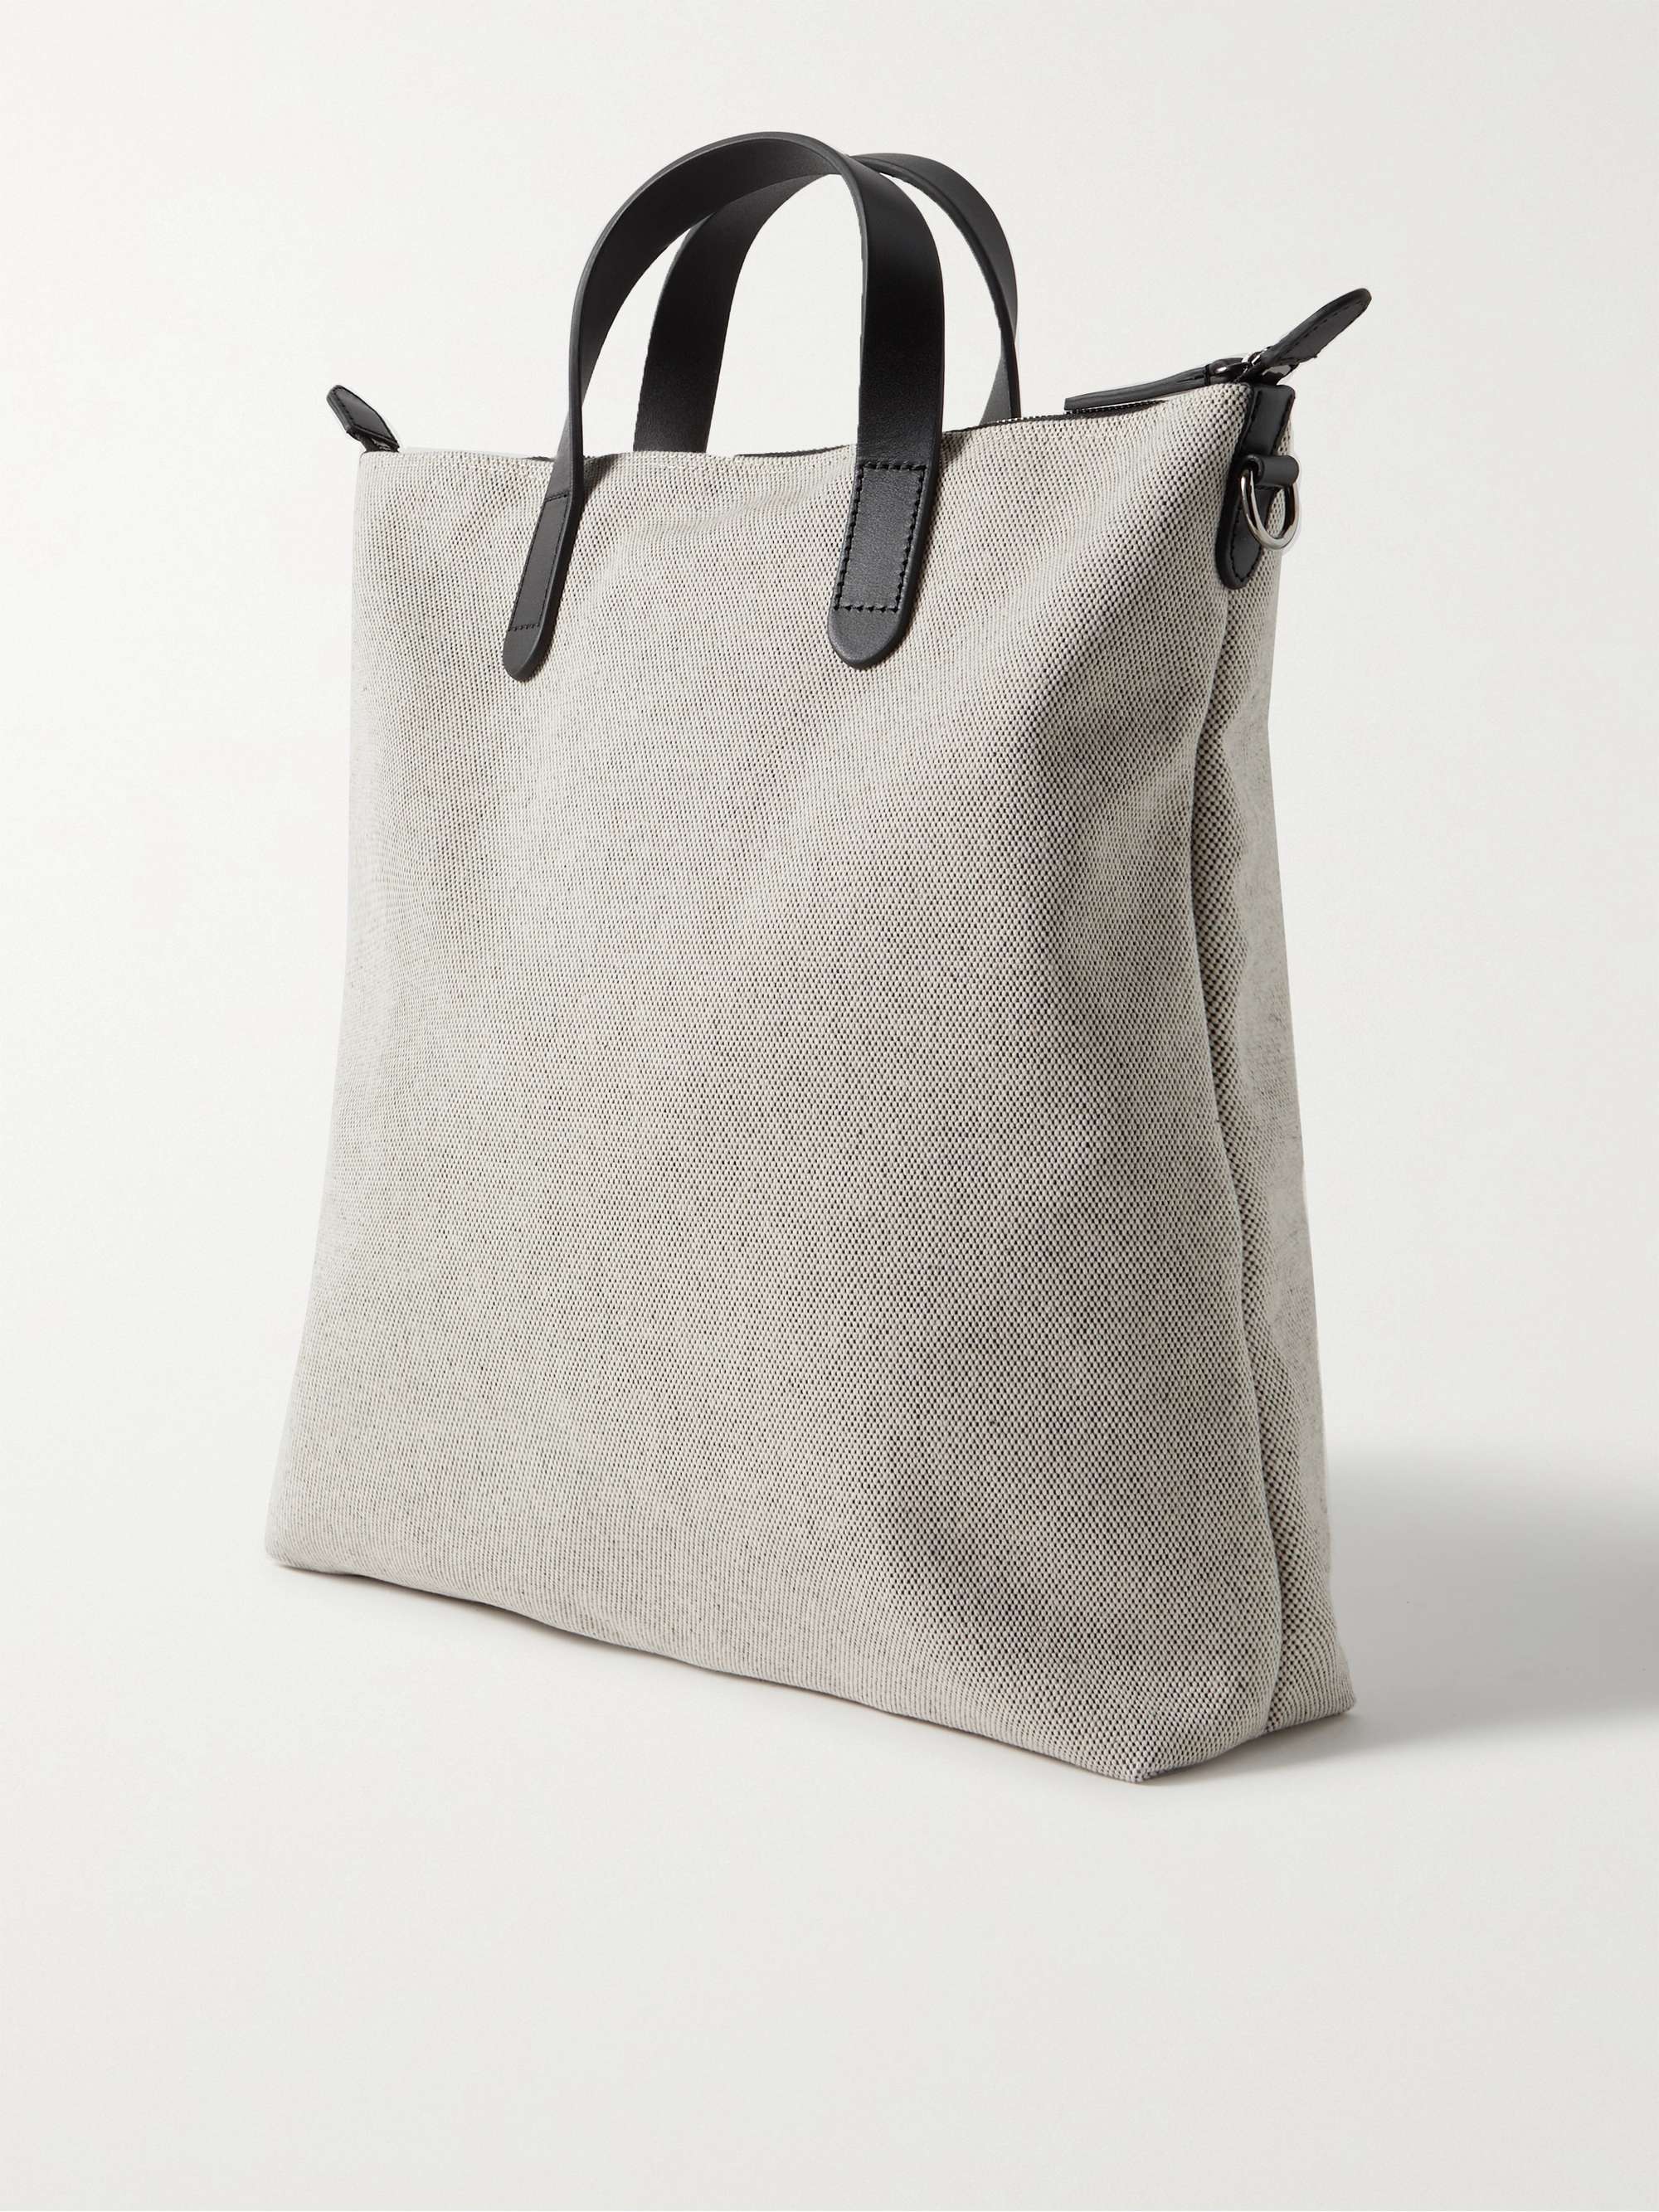 MISMO Leather-Trimmed Cotton-Canvas Tote Bag